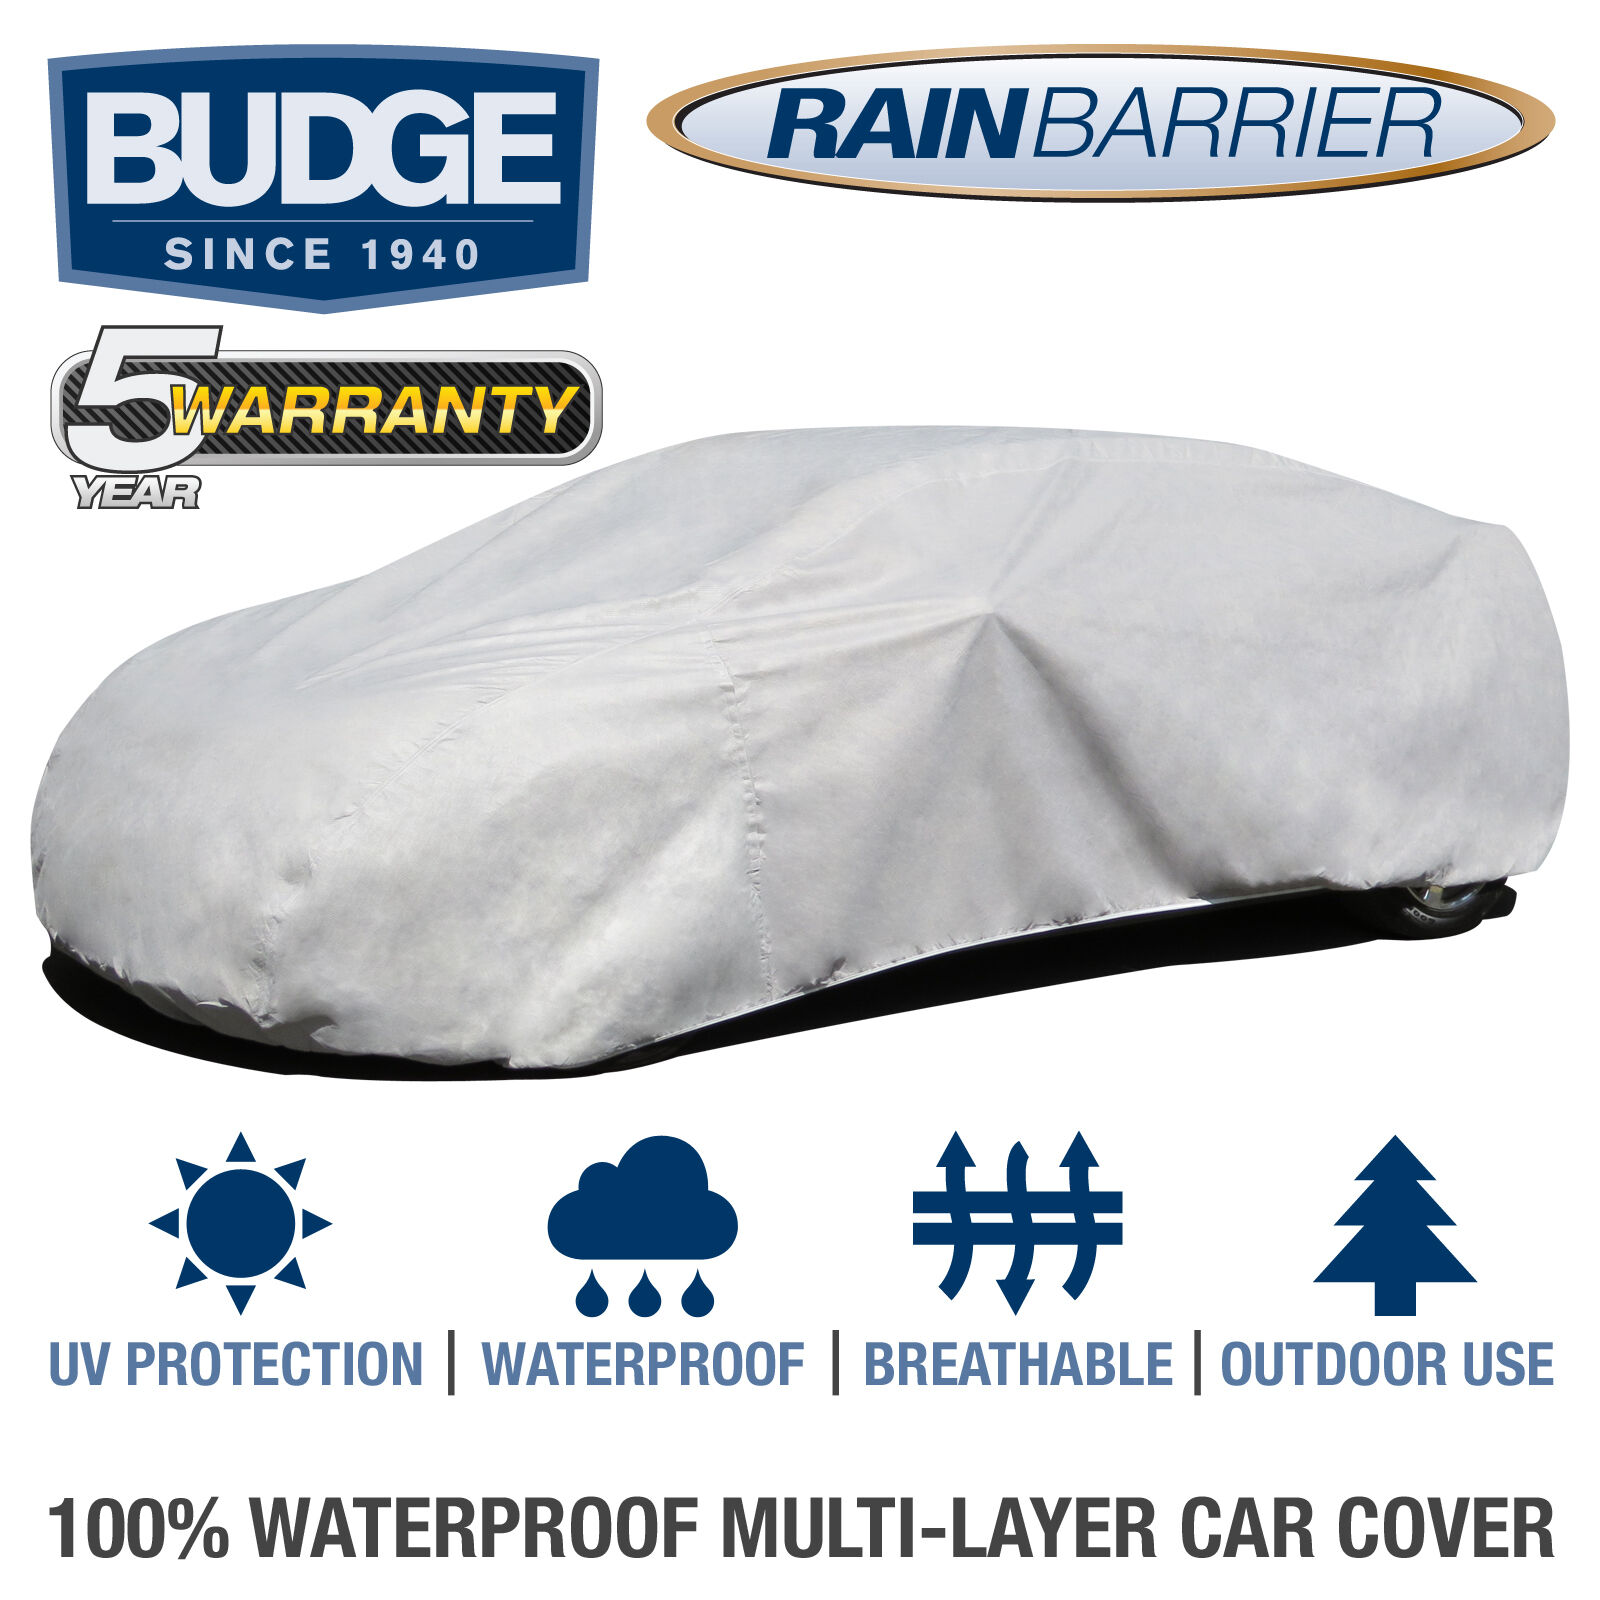 Budge Rain Barrier Car Cover Fits Chevrolet Impala 1963| Waterproof | Breathable